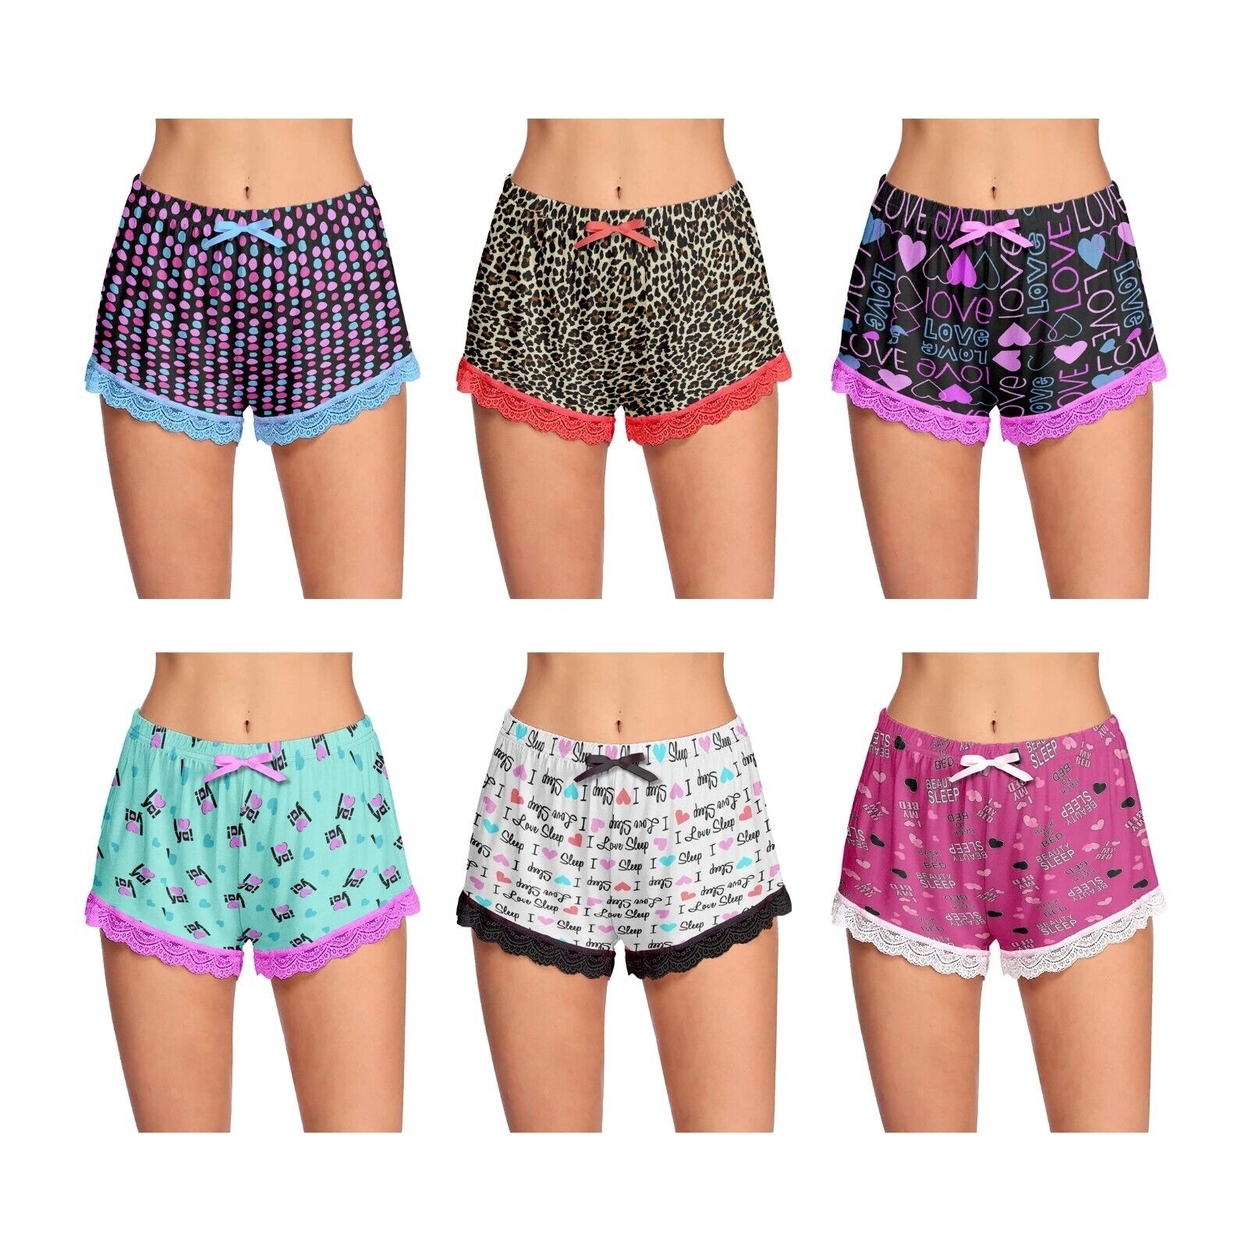 5-Pack: Women's Ultra-Soft Cozy Fun Printed Lace Trim Pajama Lounge Shorts - X-large, Shapes